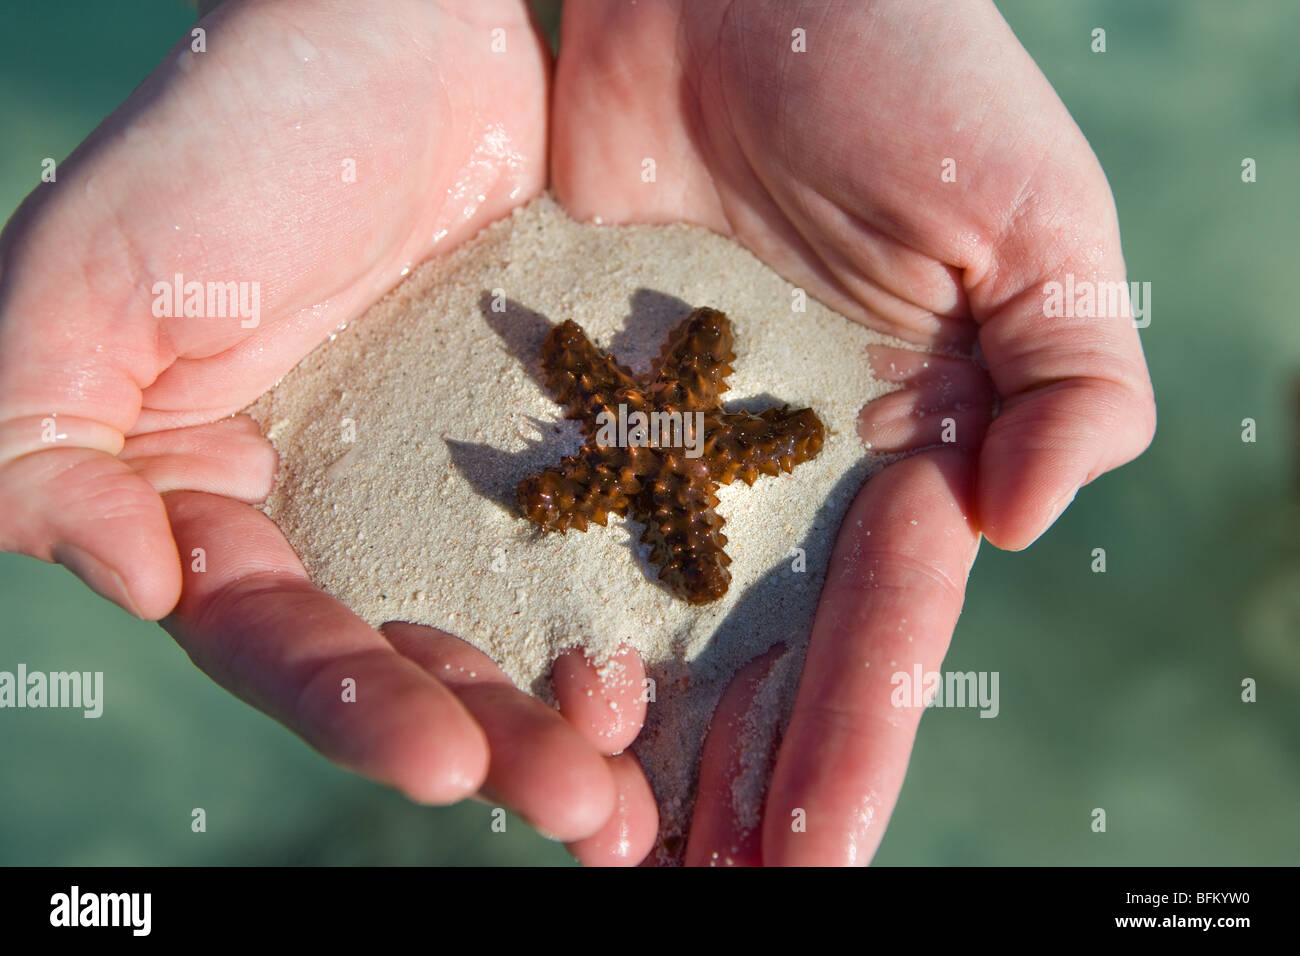 A woman's hand holds a live starfish with sand in Cozumel Mexico Stock Photo